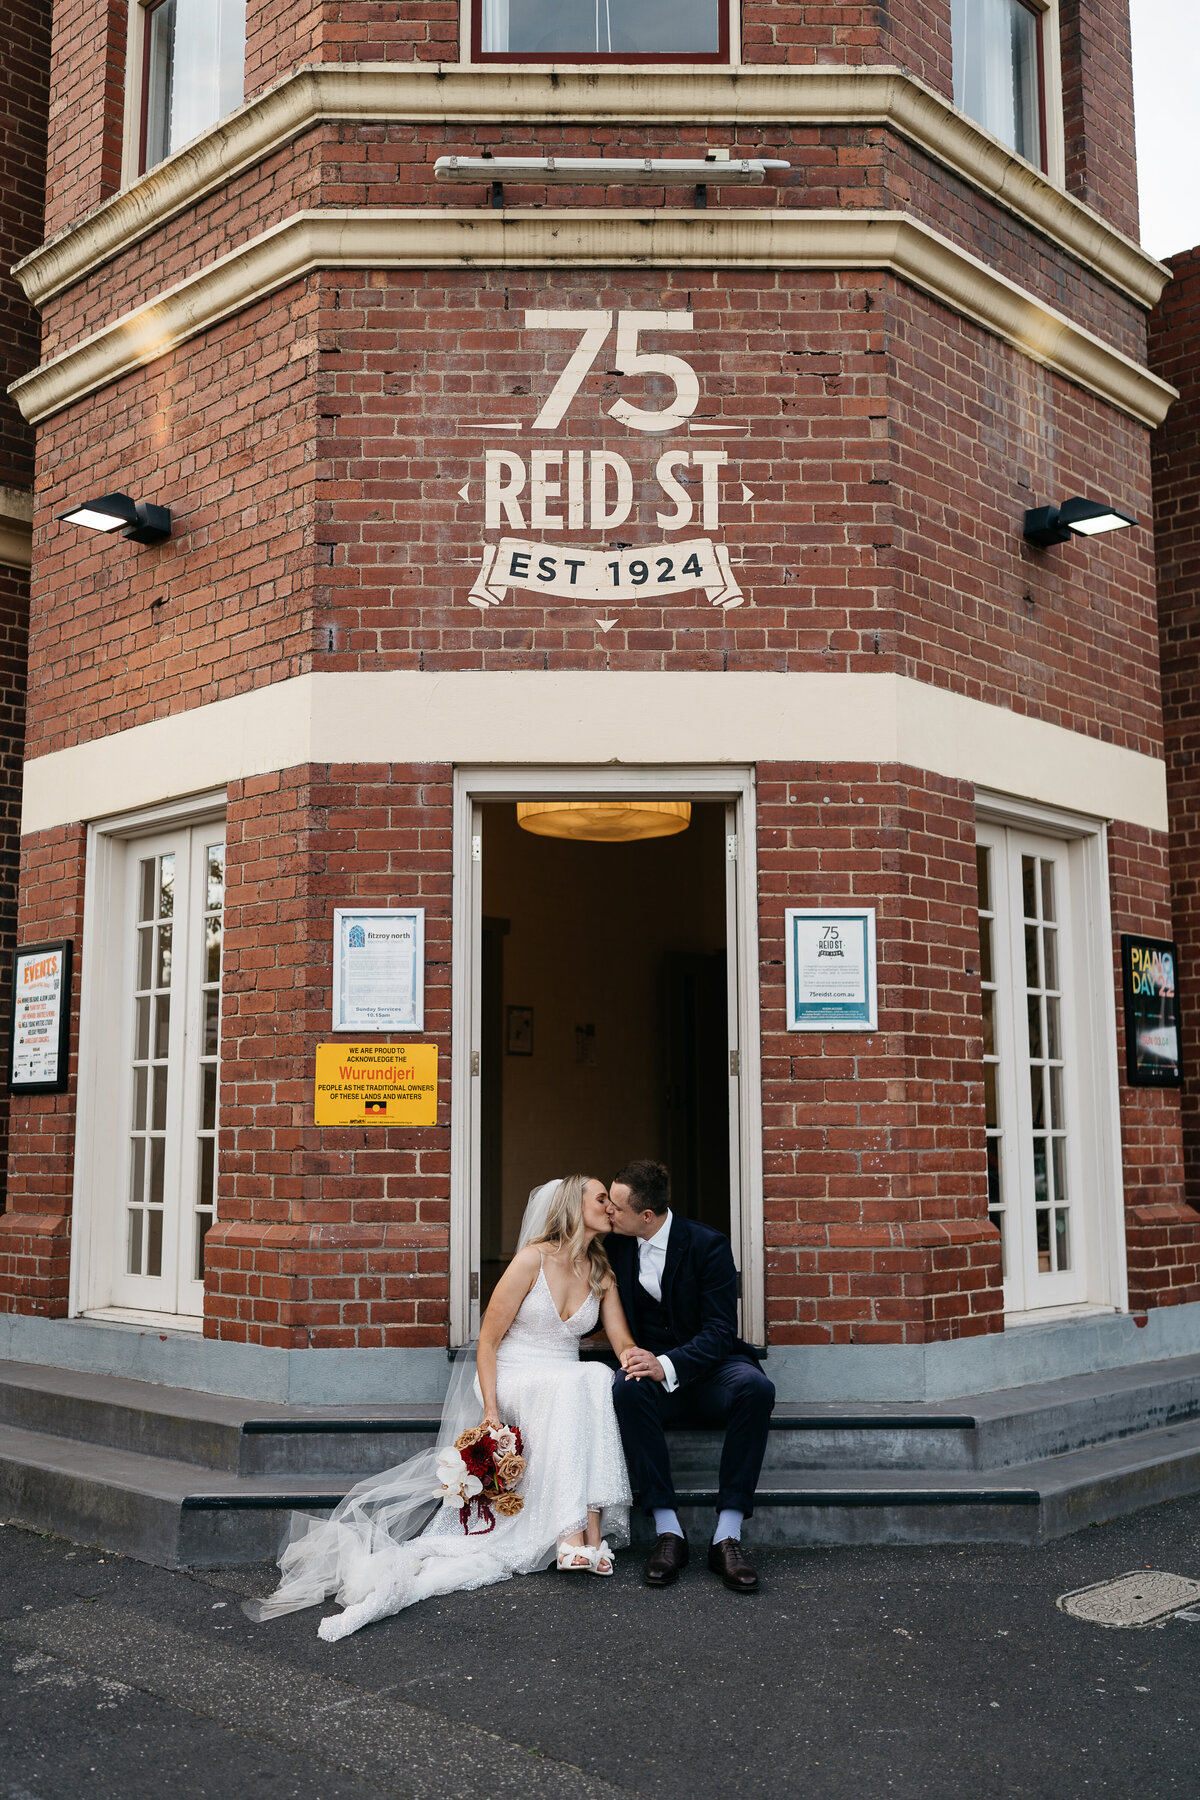 Courtney Laura Photography, Melbourne Wedding Photographer, Fitzroy Nth, 75 Reid St, Cath and Mitch-671